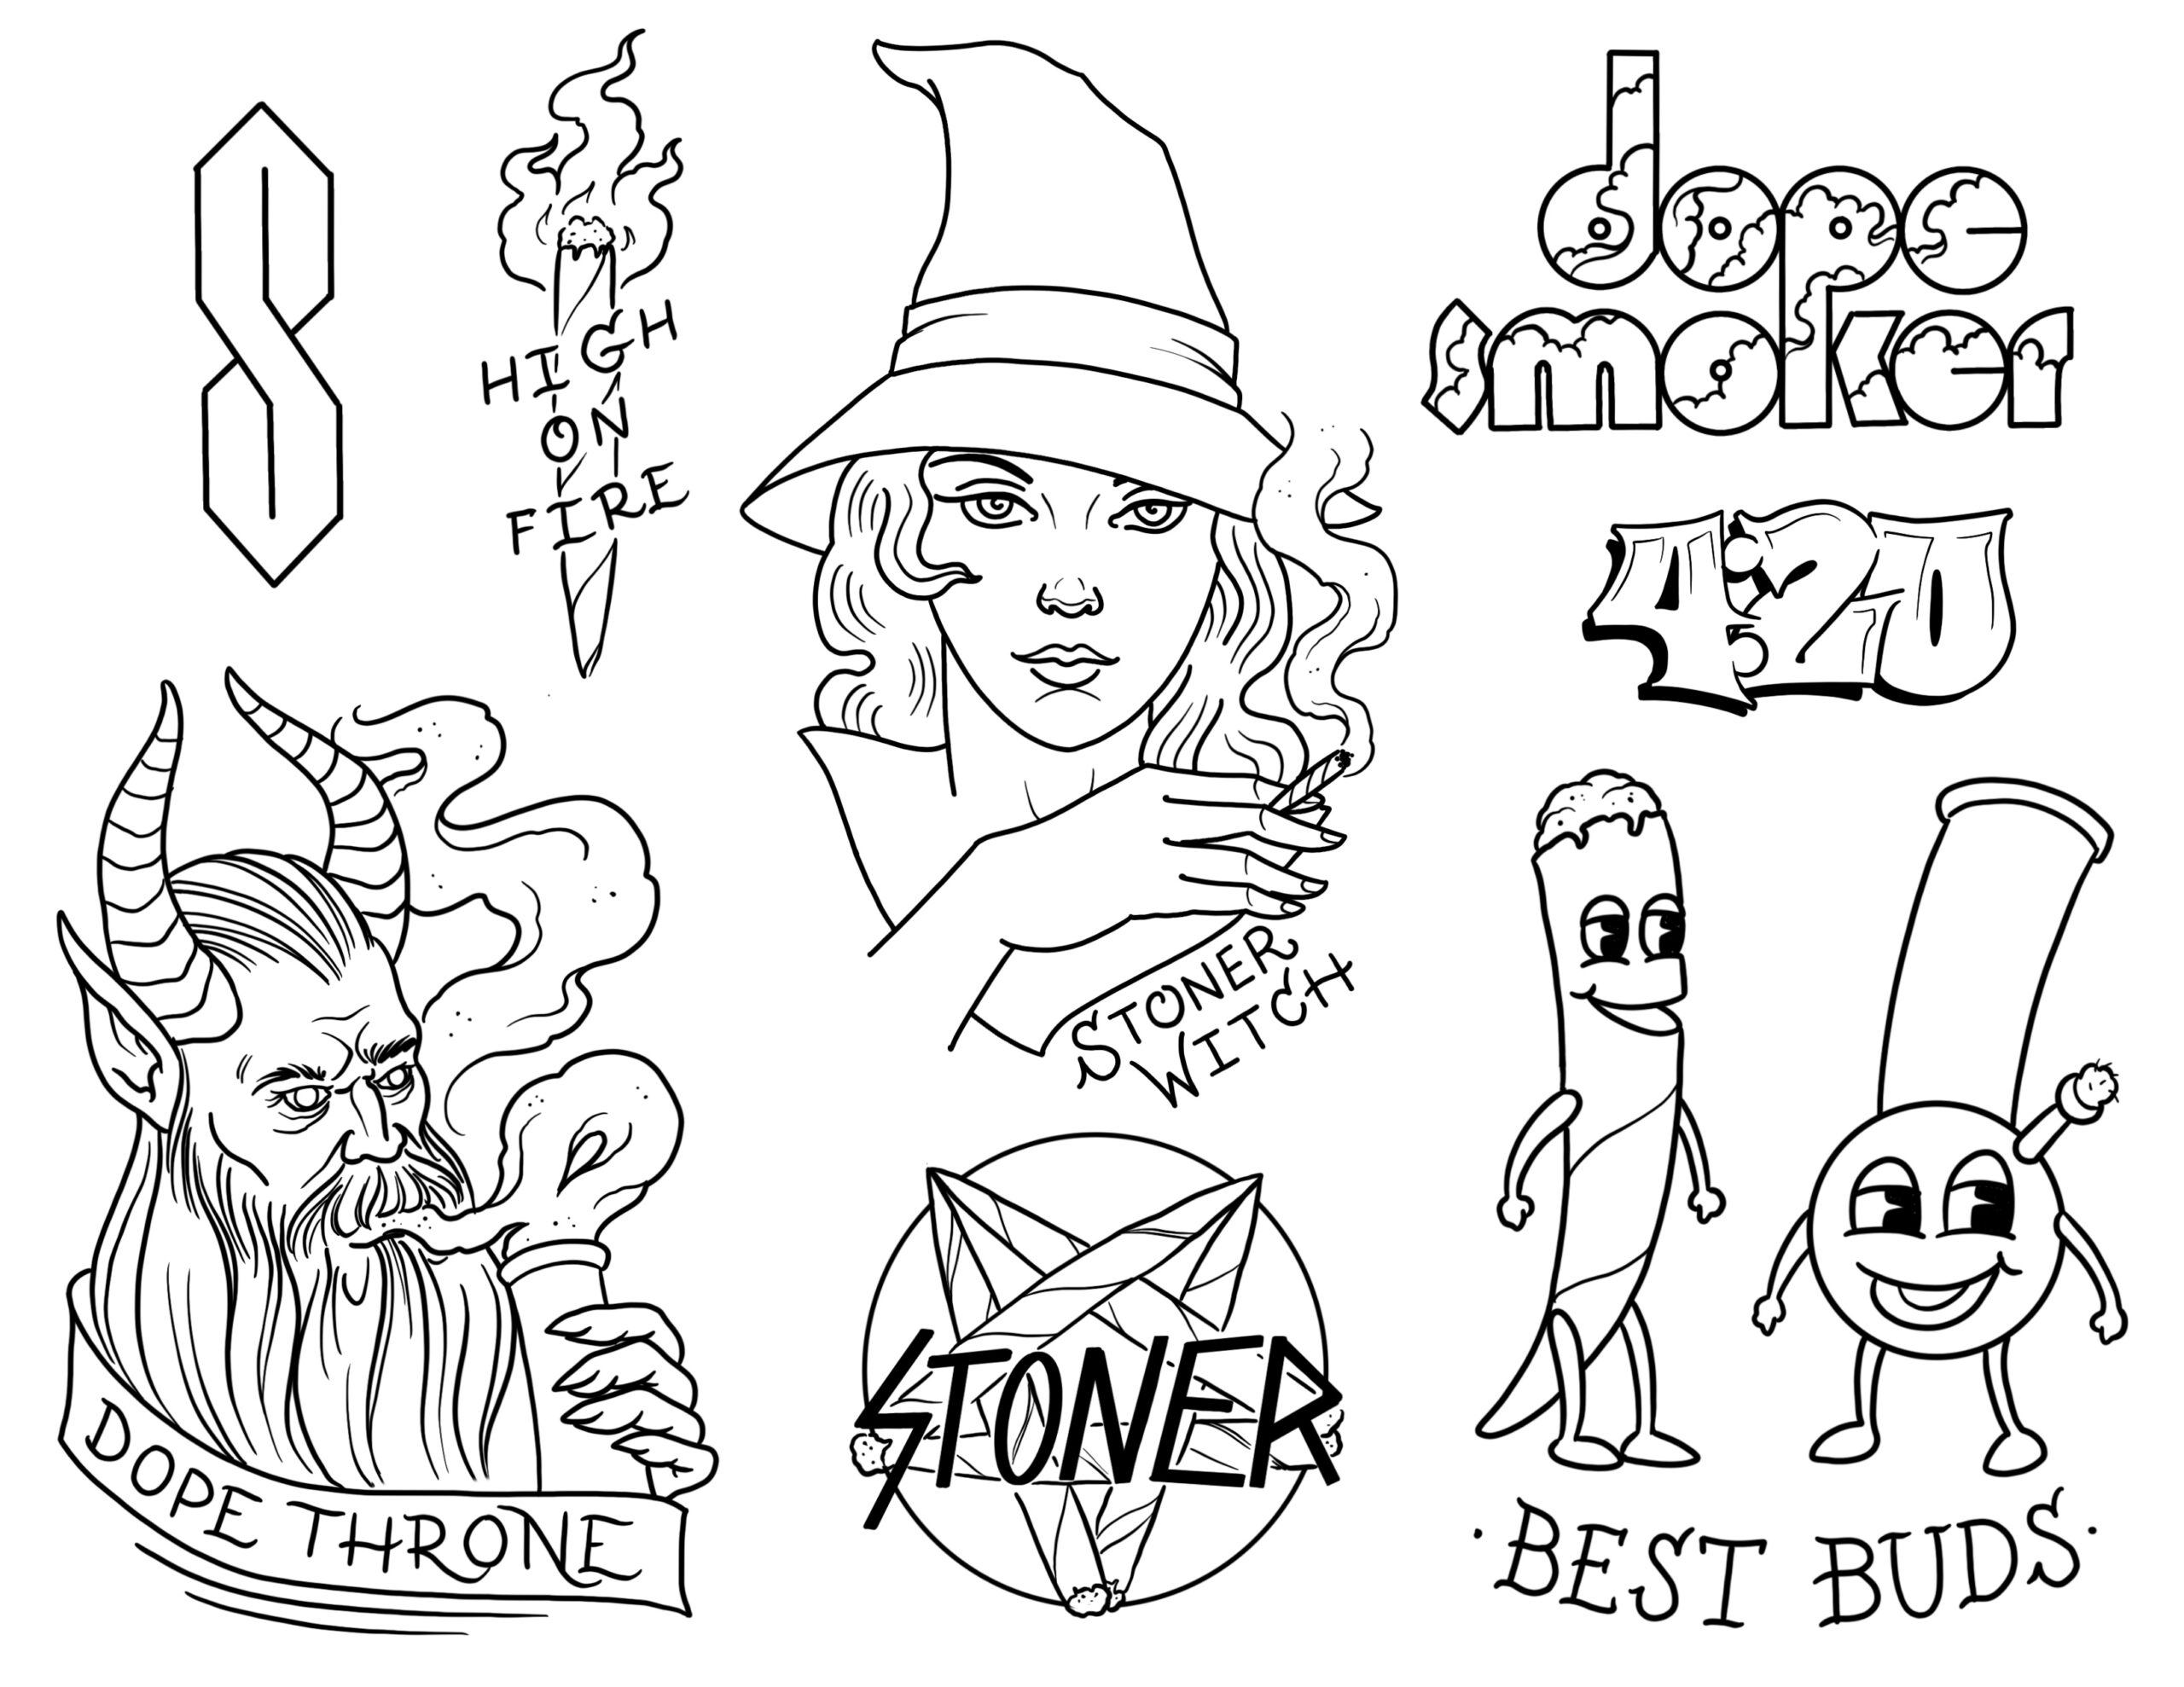 Portland tattoo shops offering flash tats for Friday the 13th  PDXtoday